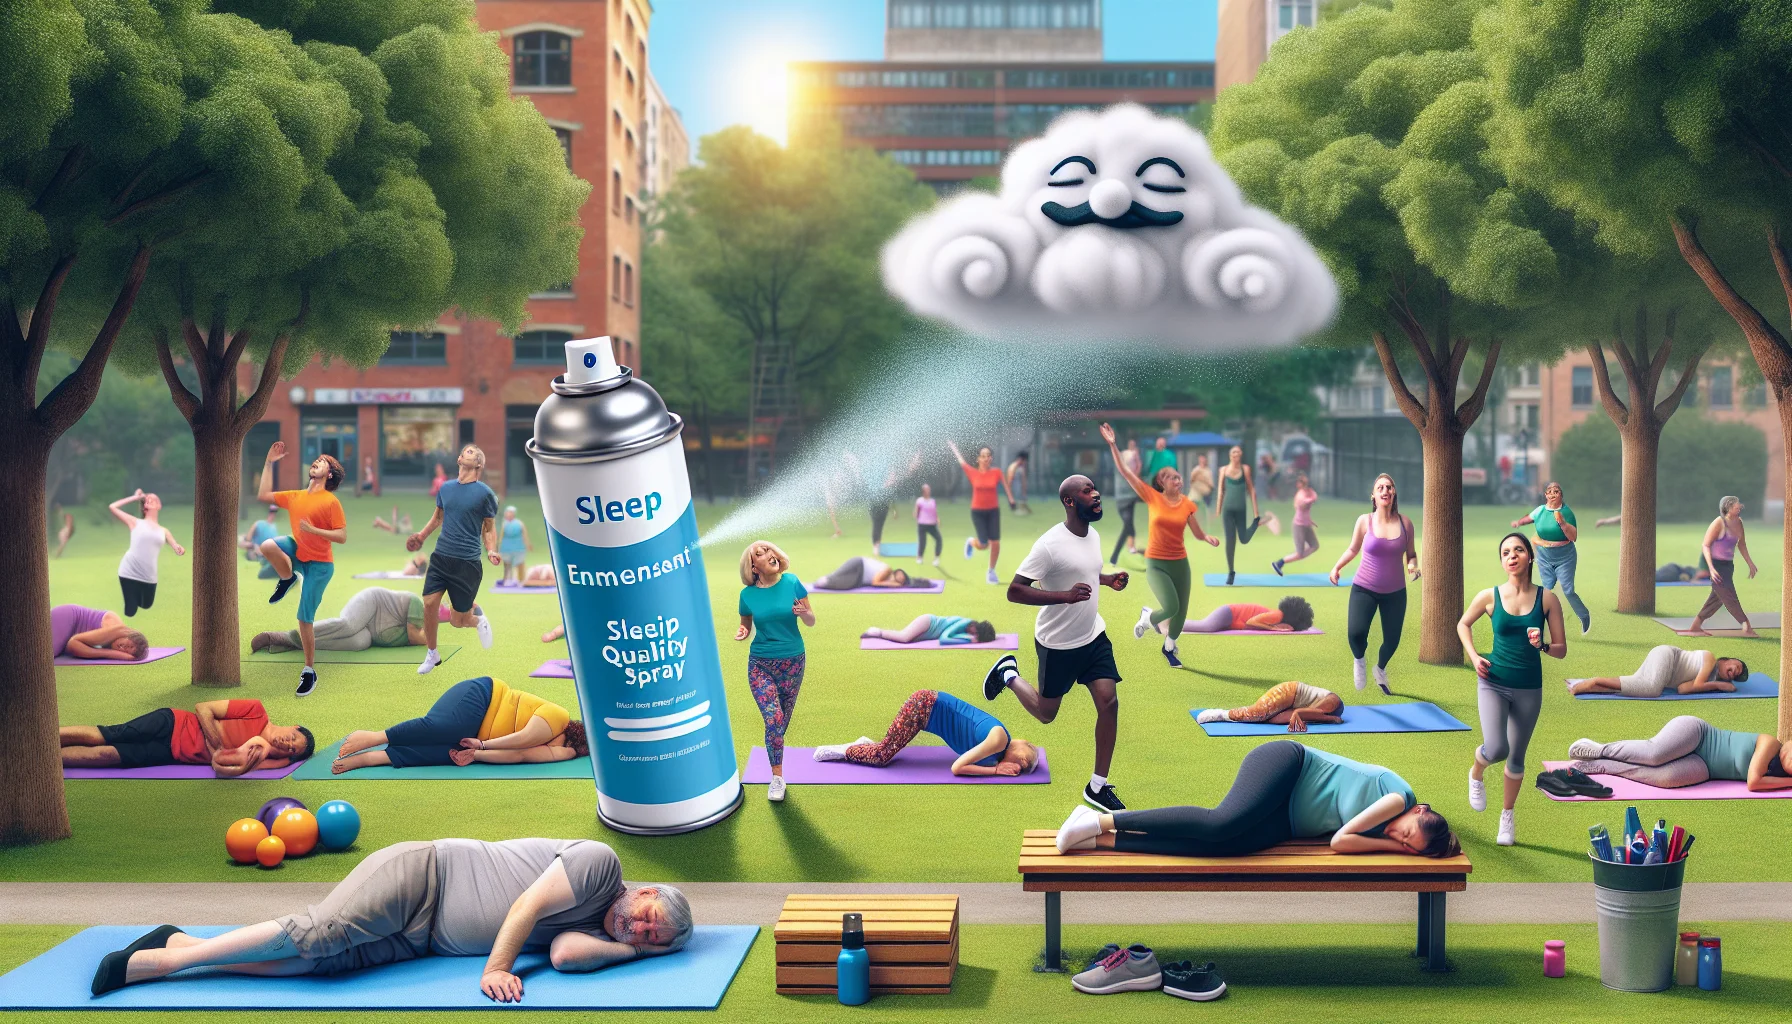 Create a satirical and realistic scene to promote an Innovative Sleep Quality Enhancement Spray. The setting features a colourful and bustling park where various people of diverse ages, genders, and descents are energetically exercising. Unexpectedly, a playful cloud appears and gently rains the sleep enhancement spray over the park, immediately transforming the once-active participants into peacefully snoozing figures on benches, yoga mats, and under trees. The canister of the sleep spray is shown prominently, radiating a comforting, inviting aura.